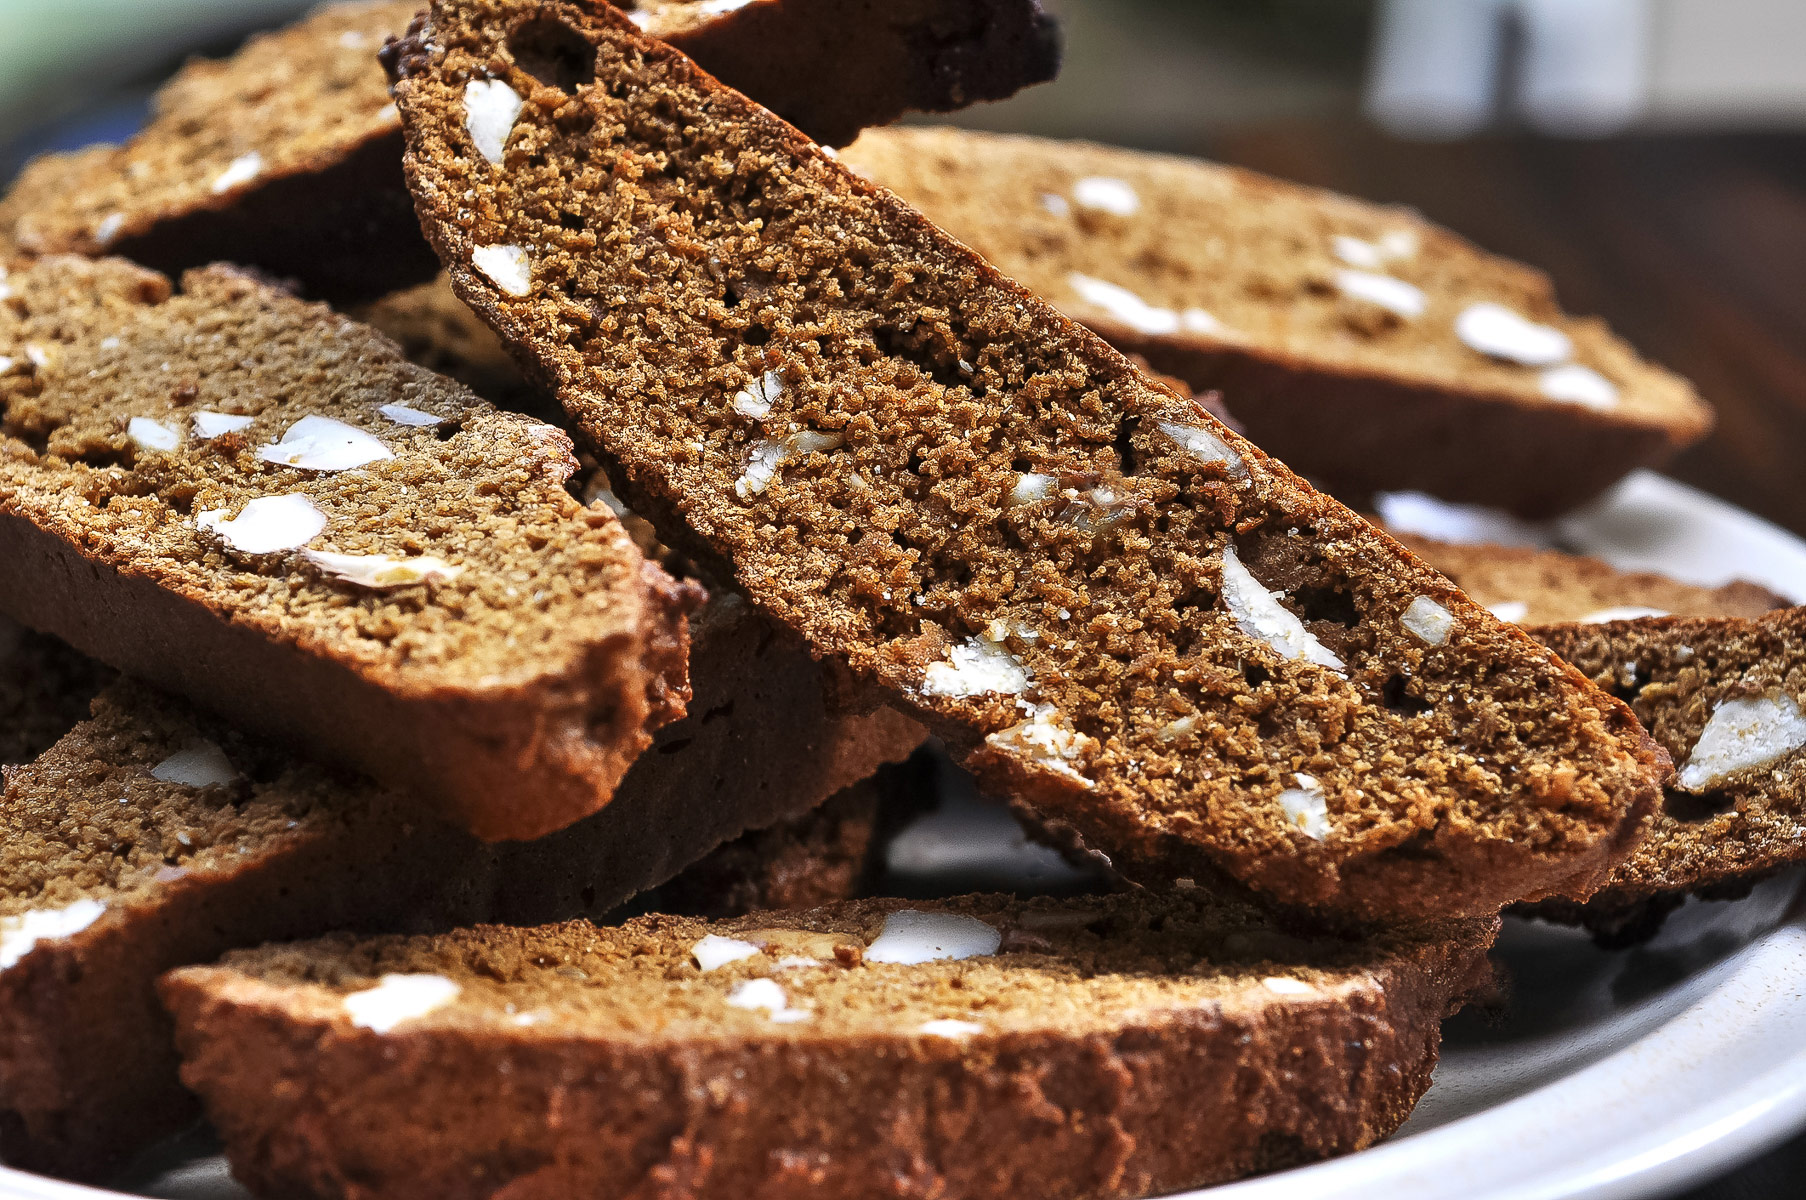 Stack of Gingerbread Biscotti with sliced almonds in them; Gingerbread Biscotti, Jane Bonacci, The Heritage Cook.